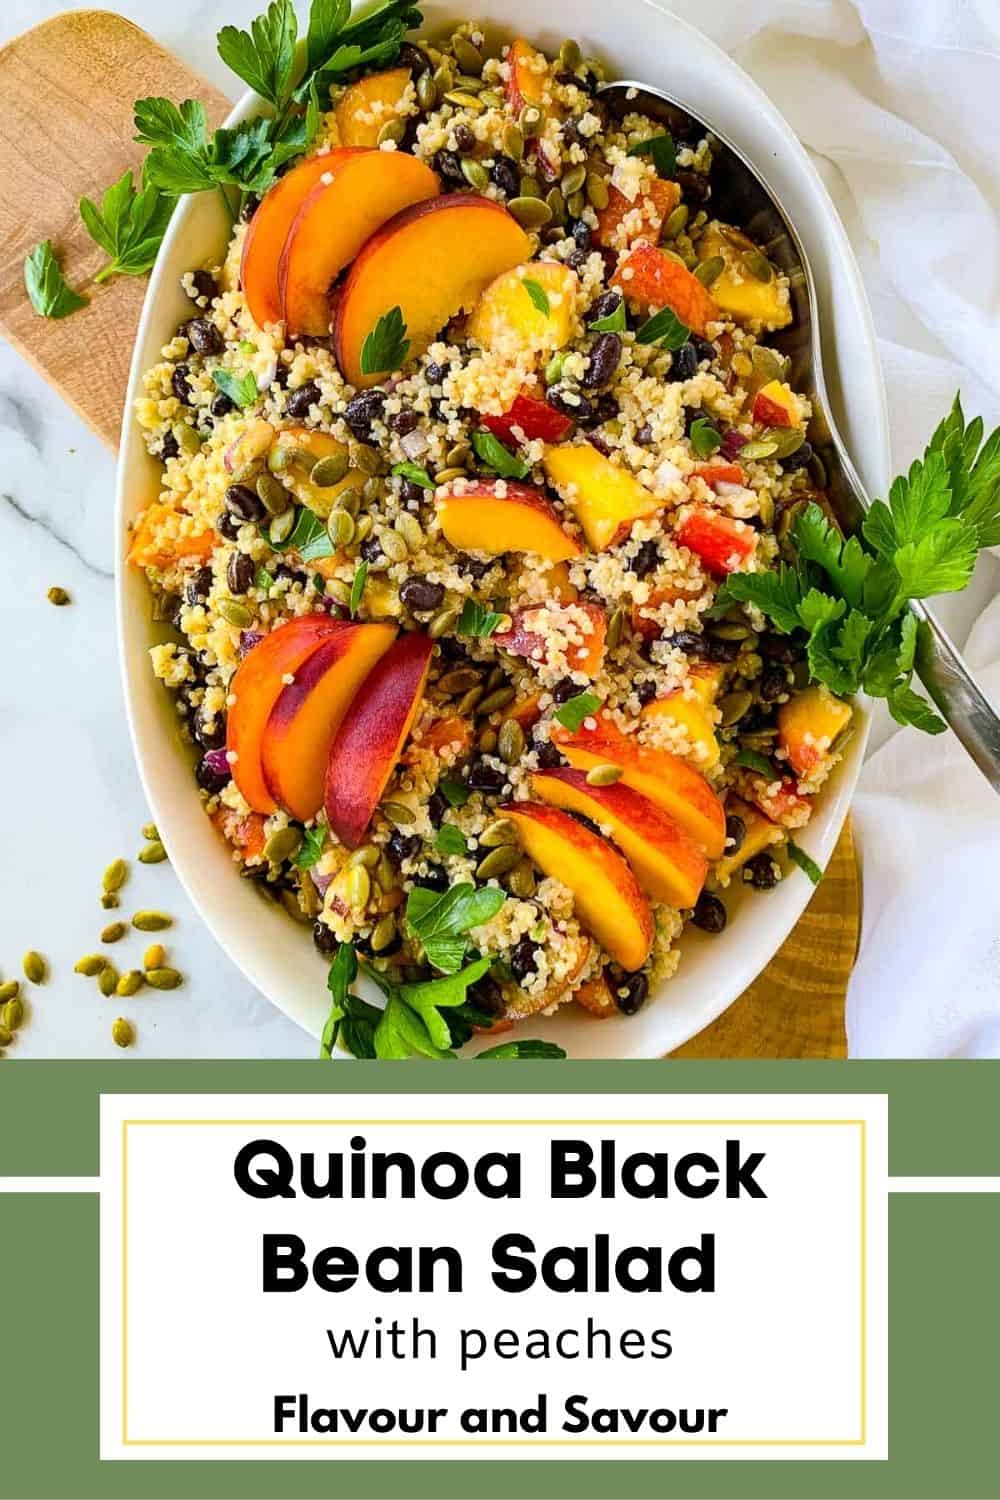 image with text for quinoa black bean salad with peaches.